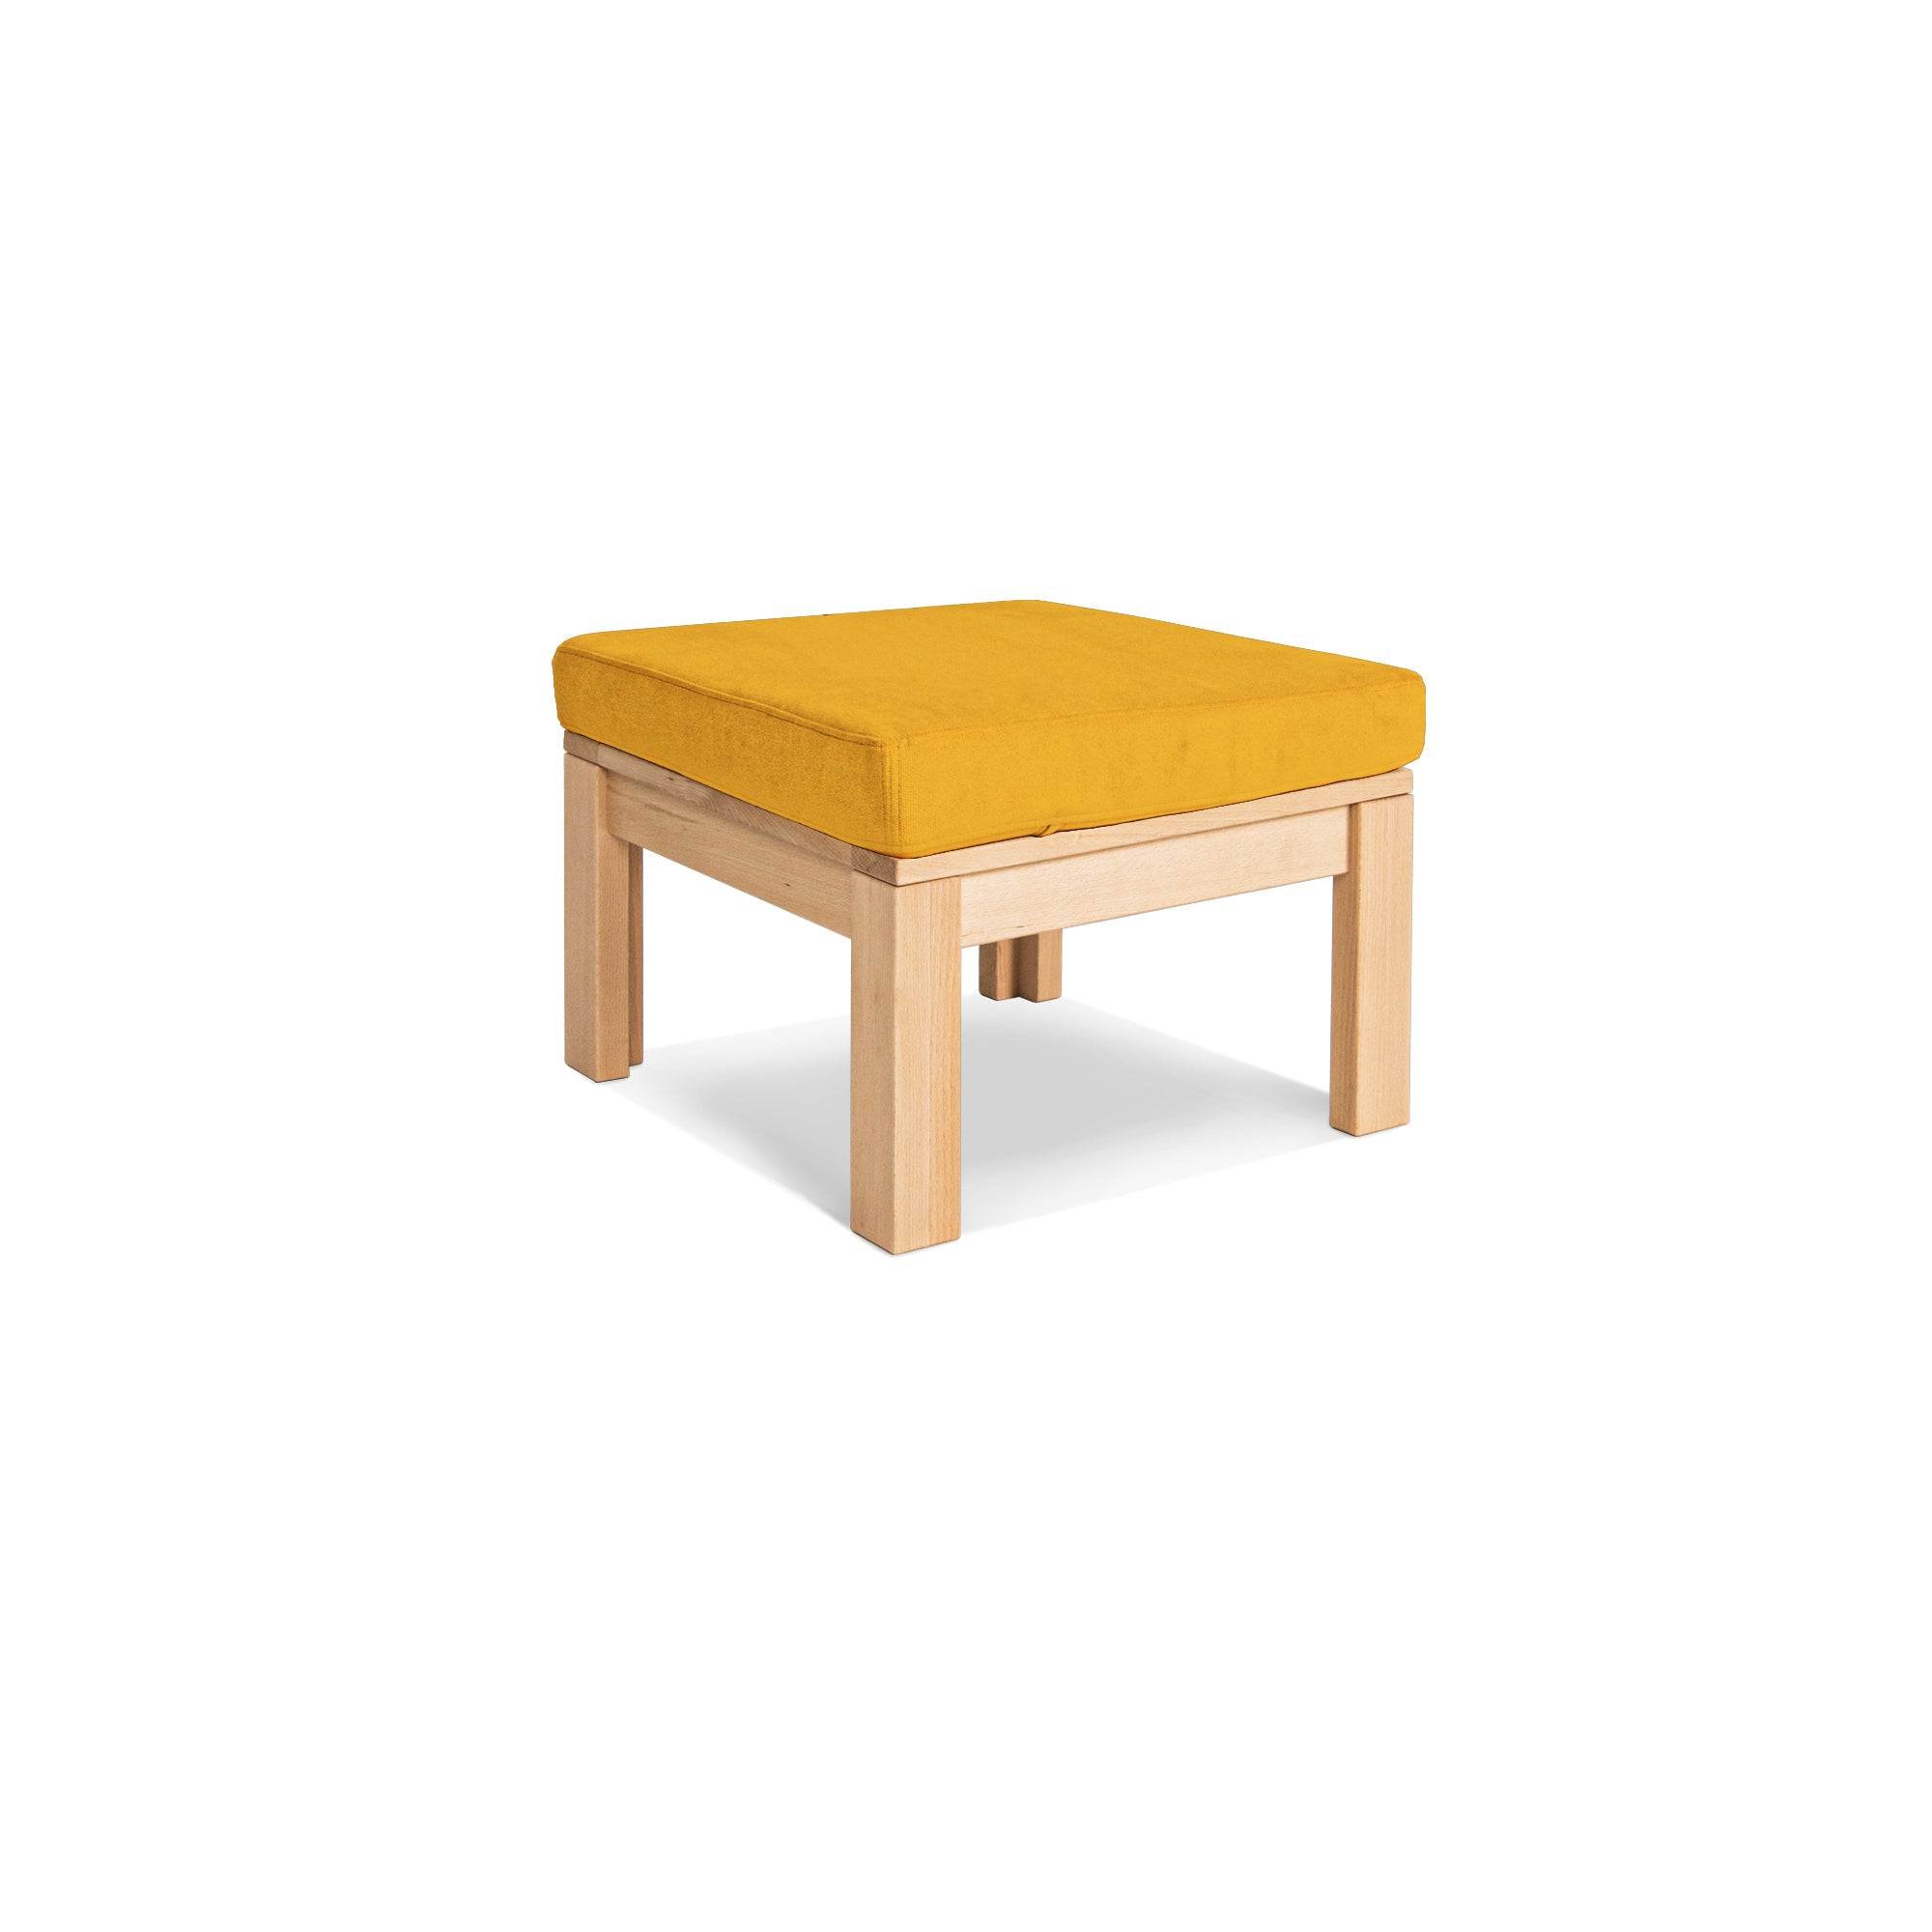 MEXICO Table Pouffe- Beech Wood yellow fabric colour